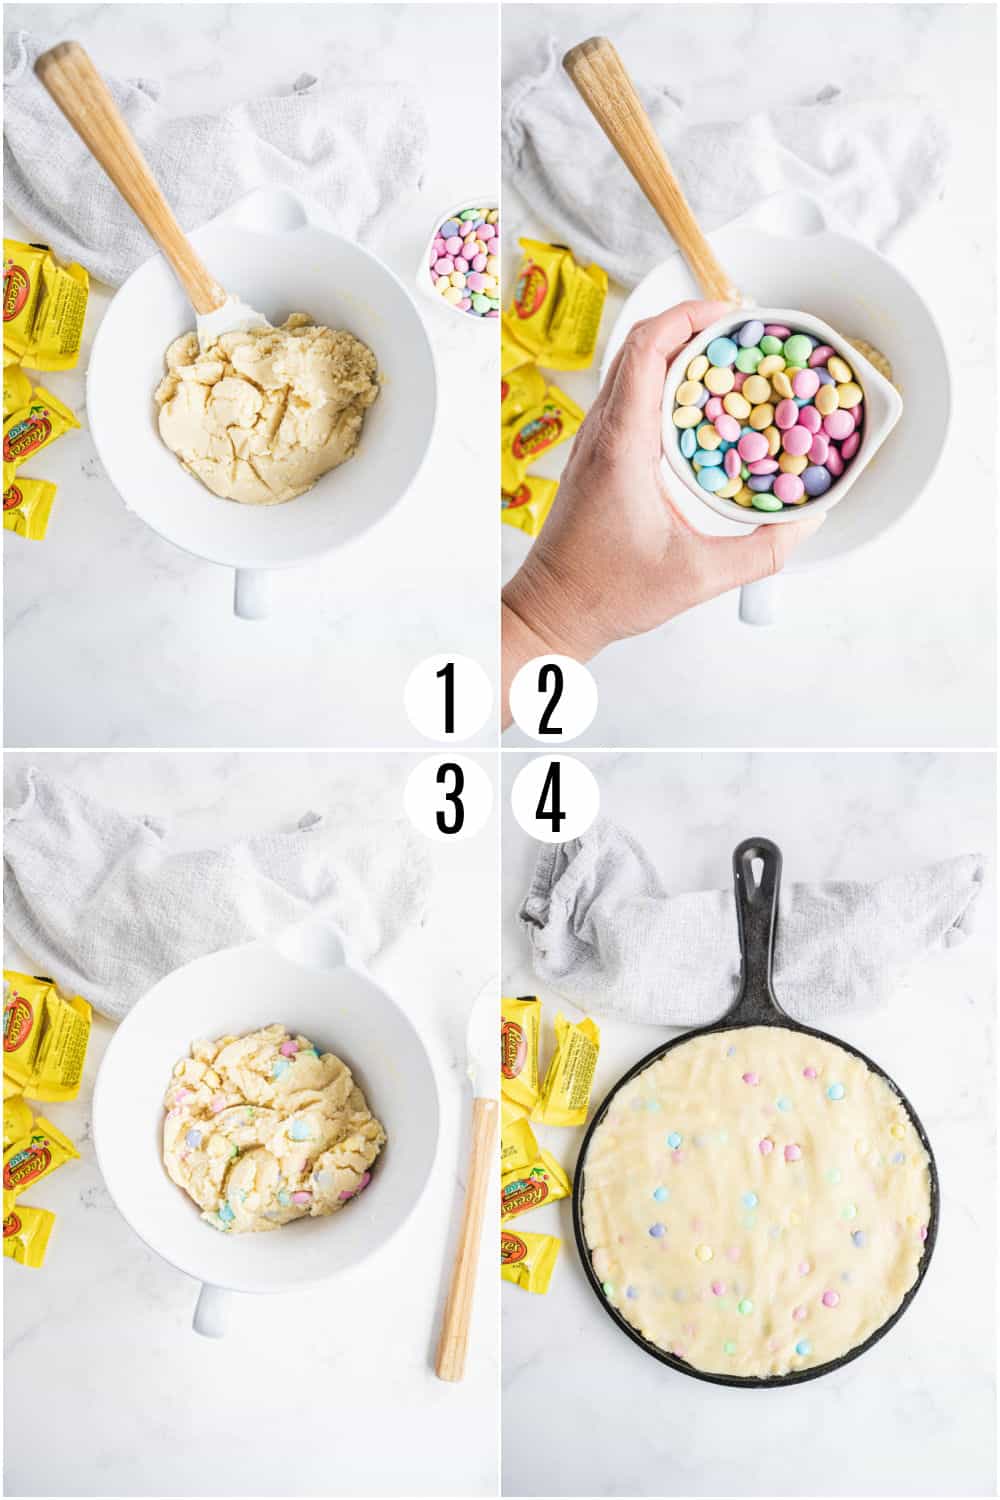 Step by step photos showing how to make sugar cookie cake in a skillet.